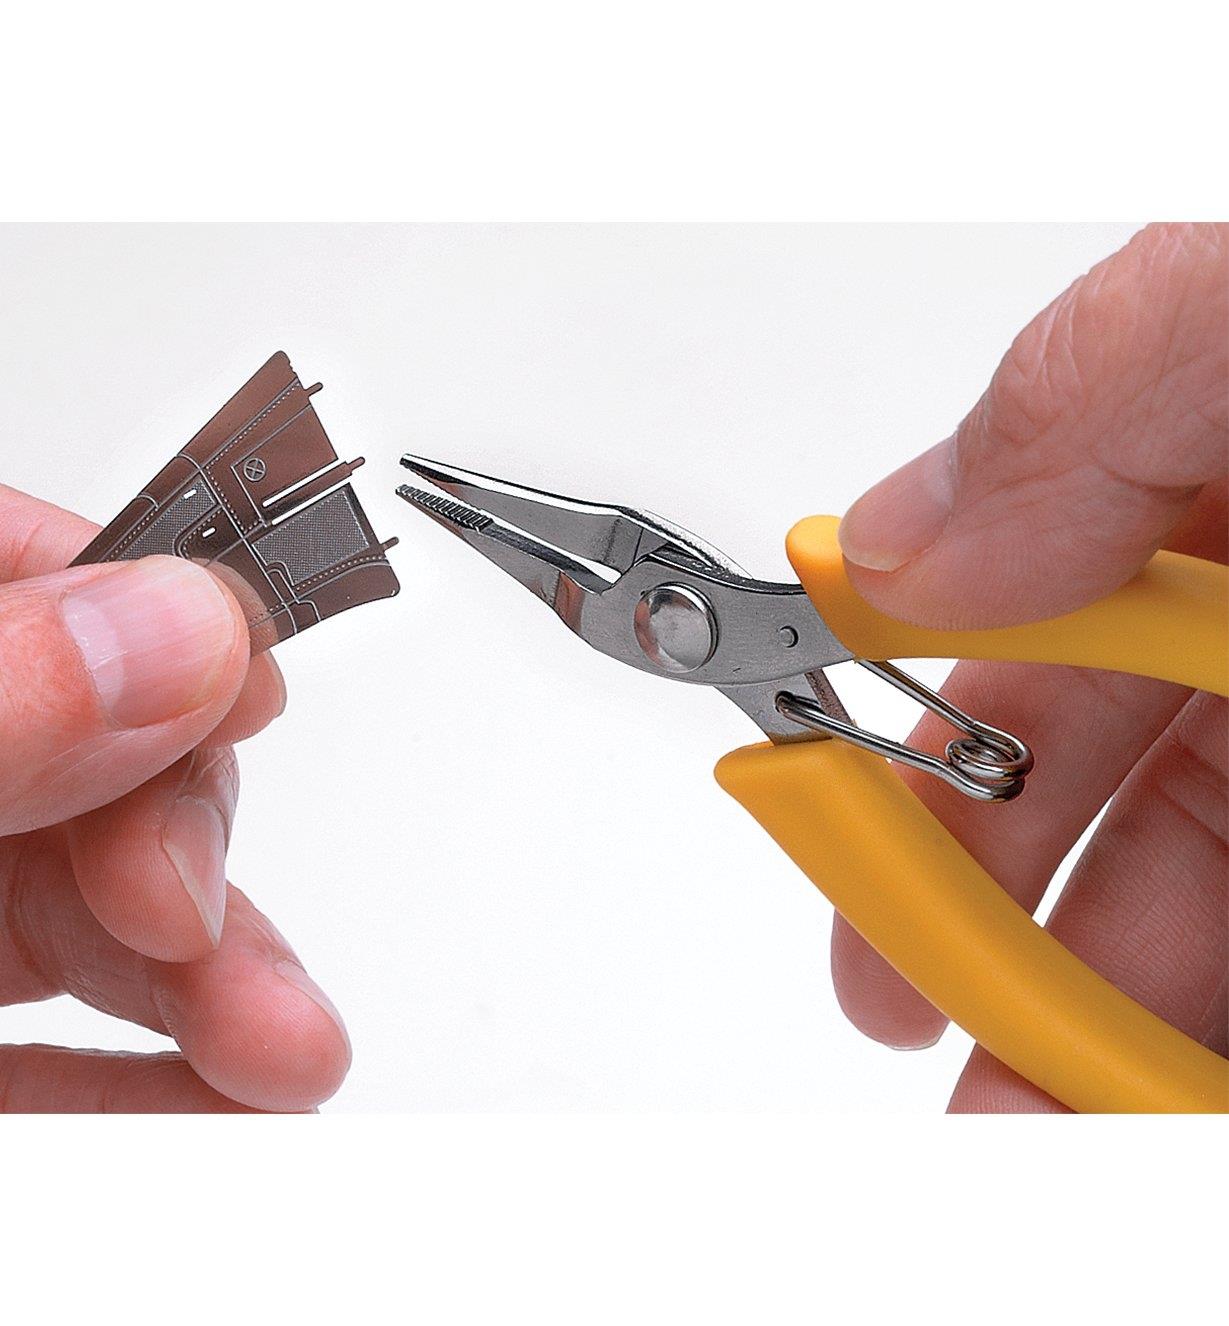 Using Mini Pliers to put together a metal model